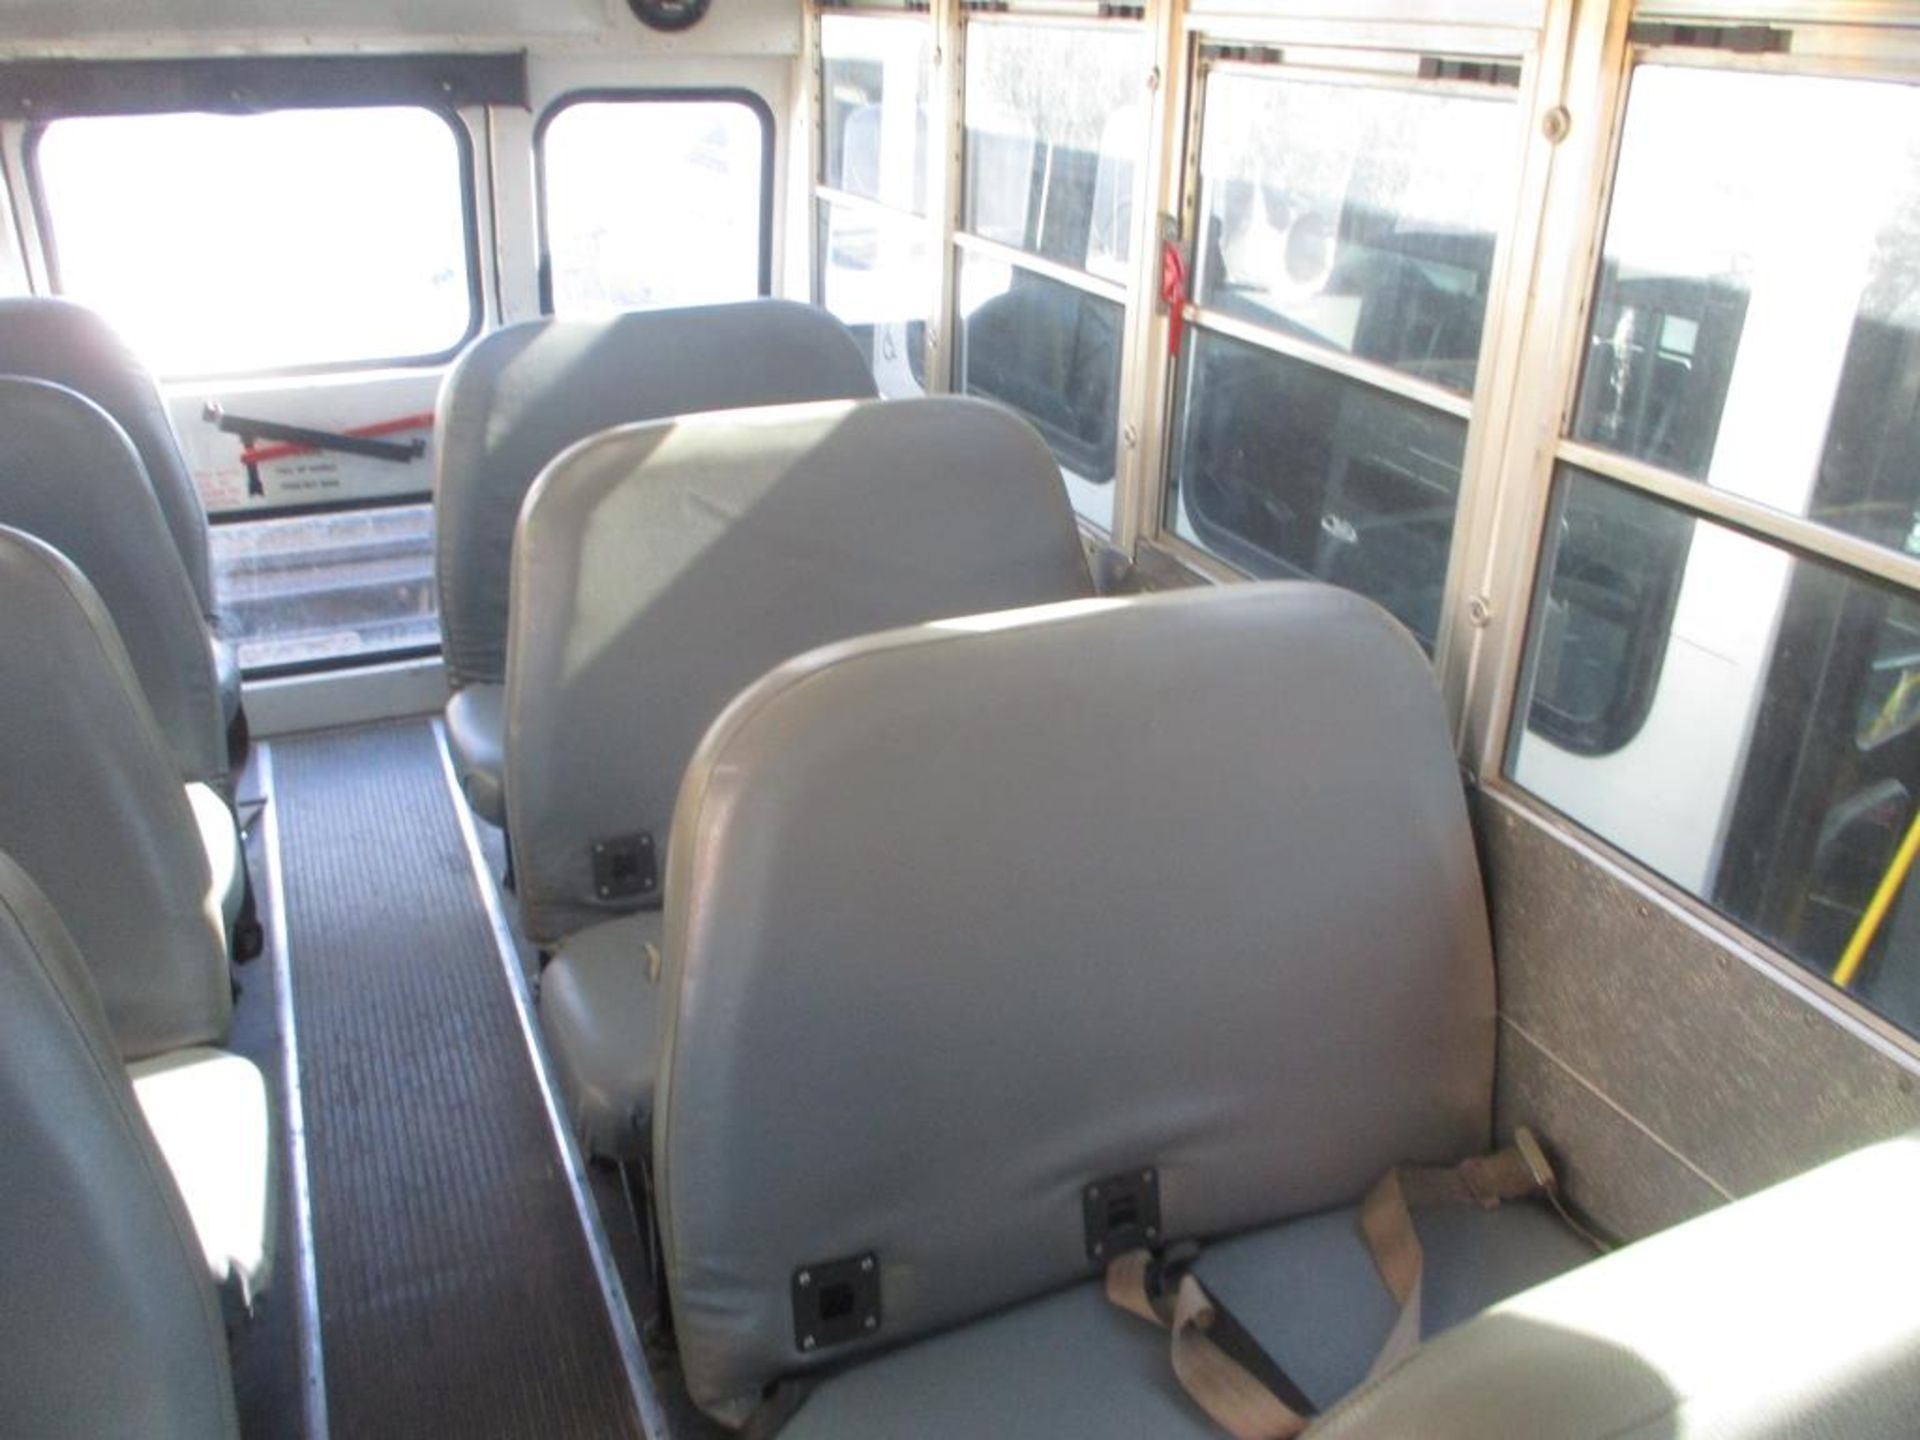 (Lot # 3922) - 2008 Ford E-Series School Bus - Image 6 of 11